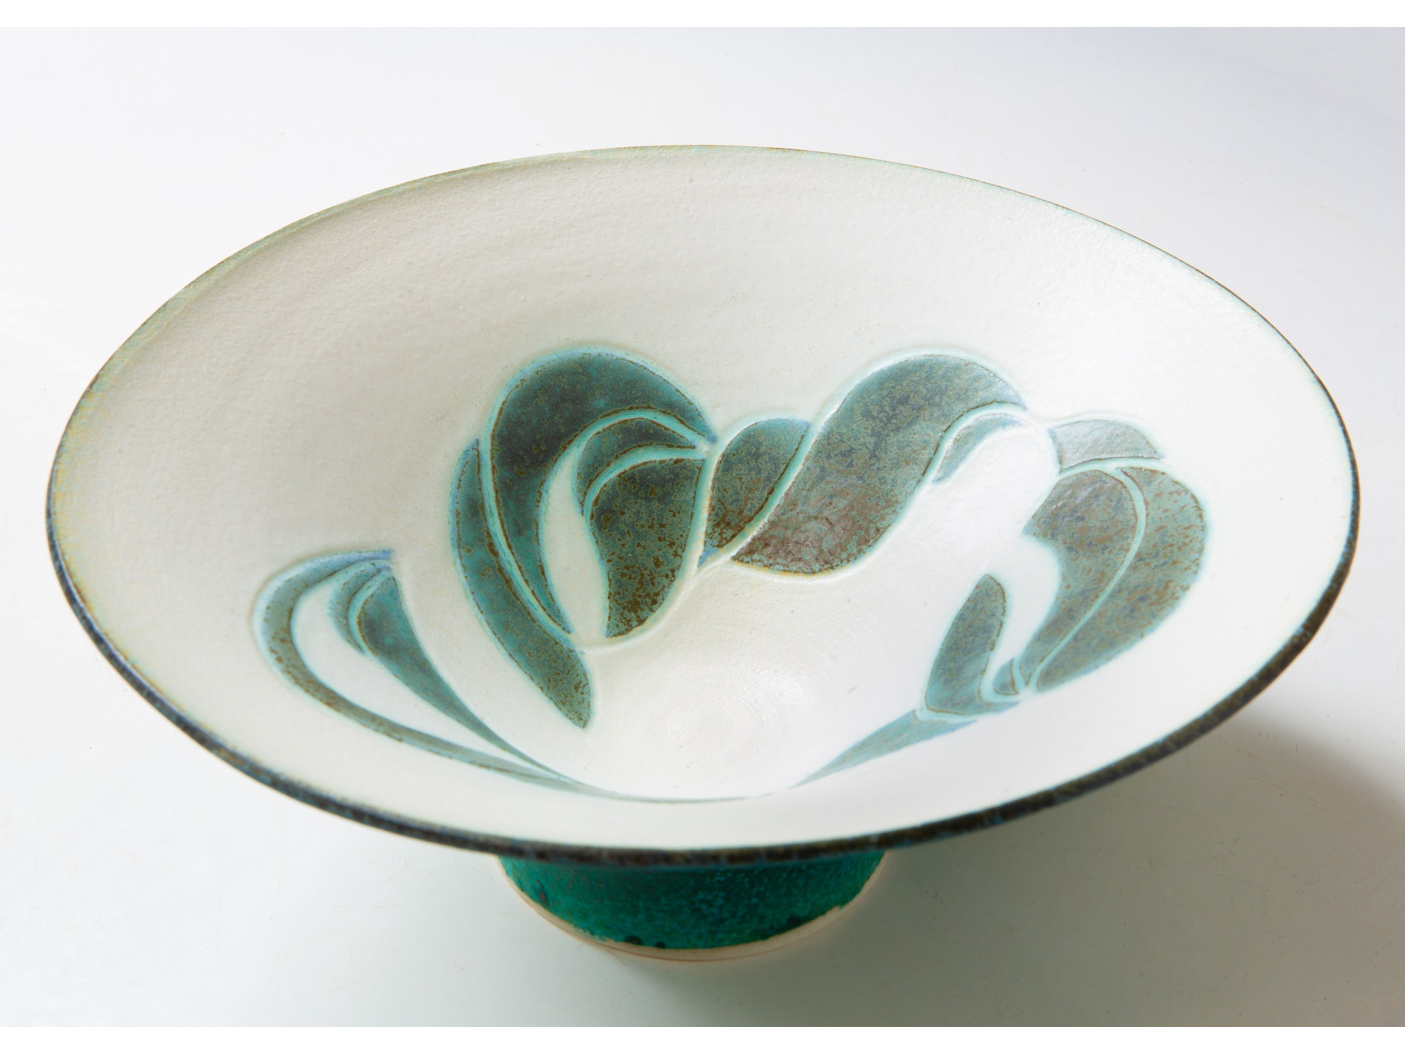 Usch Spettigue - Wide bowl with sgraffito